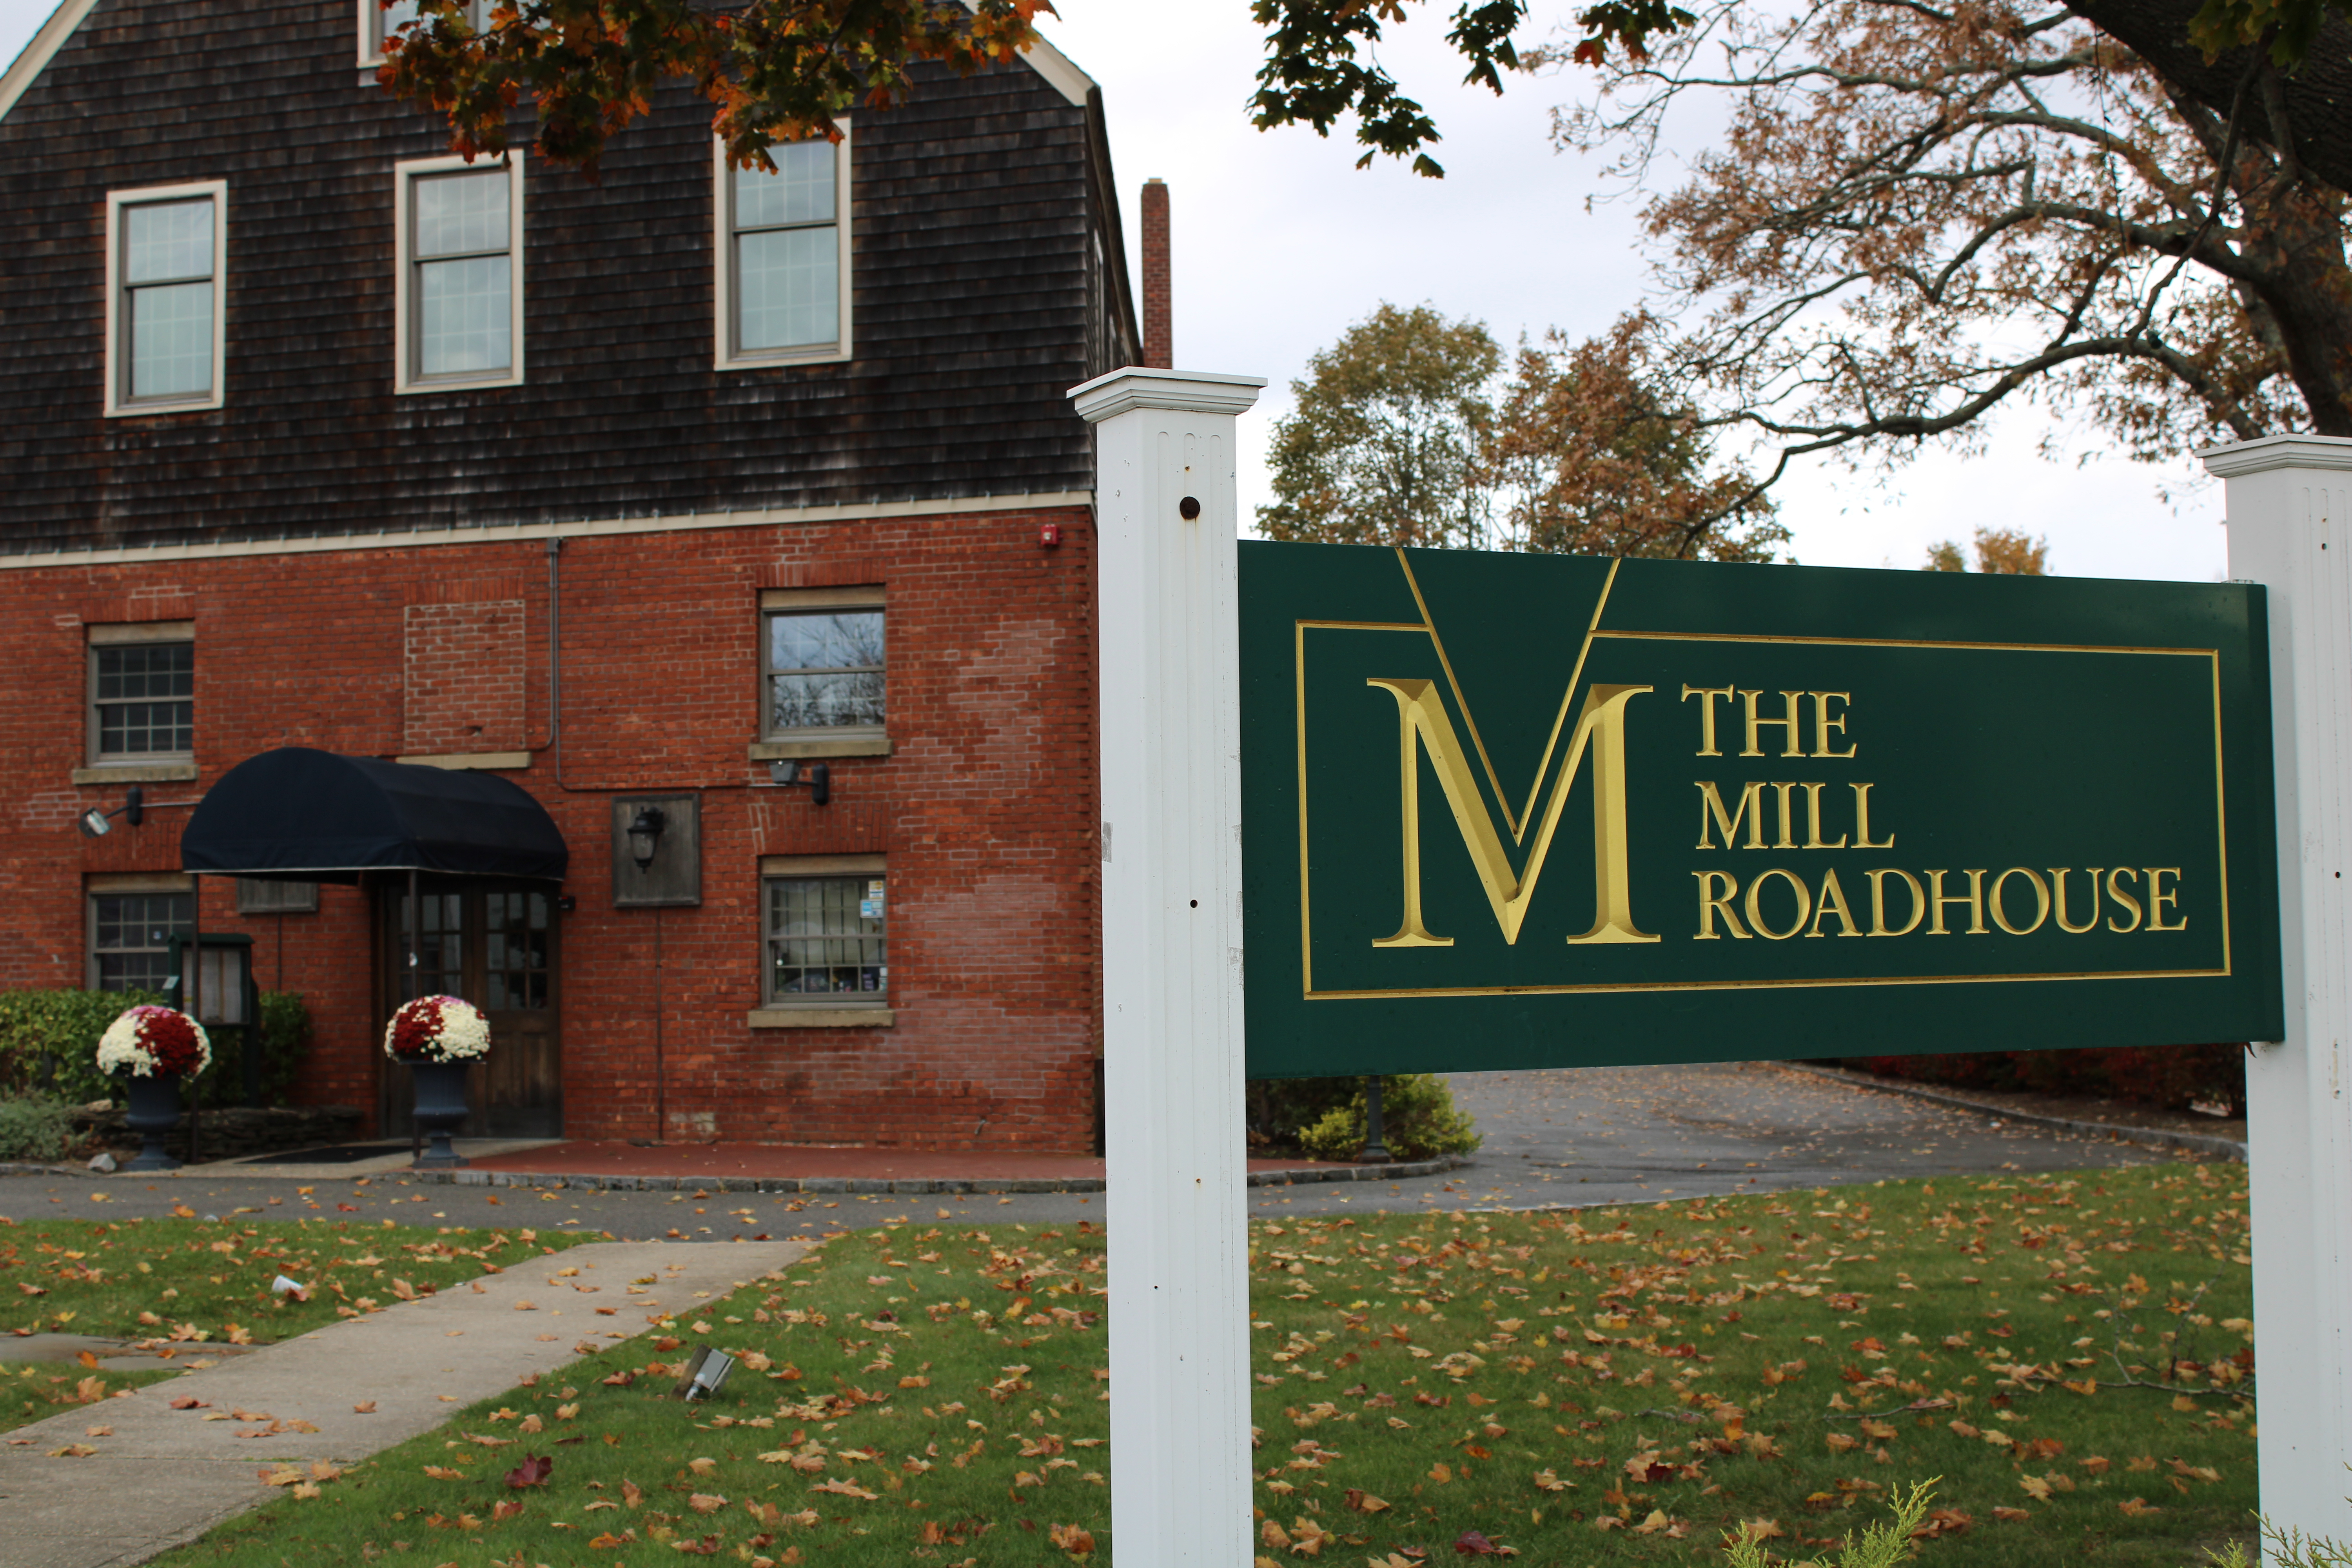 The discussion wil be held at The Mill Roadhouse in Westhampton Beach on Thursday at noon.  RACHEL VALDESPINO